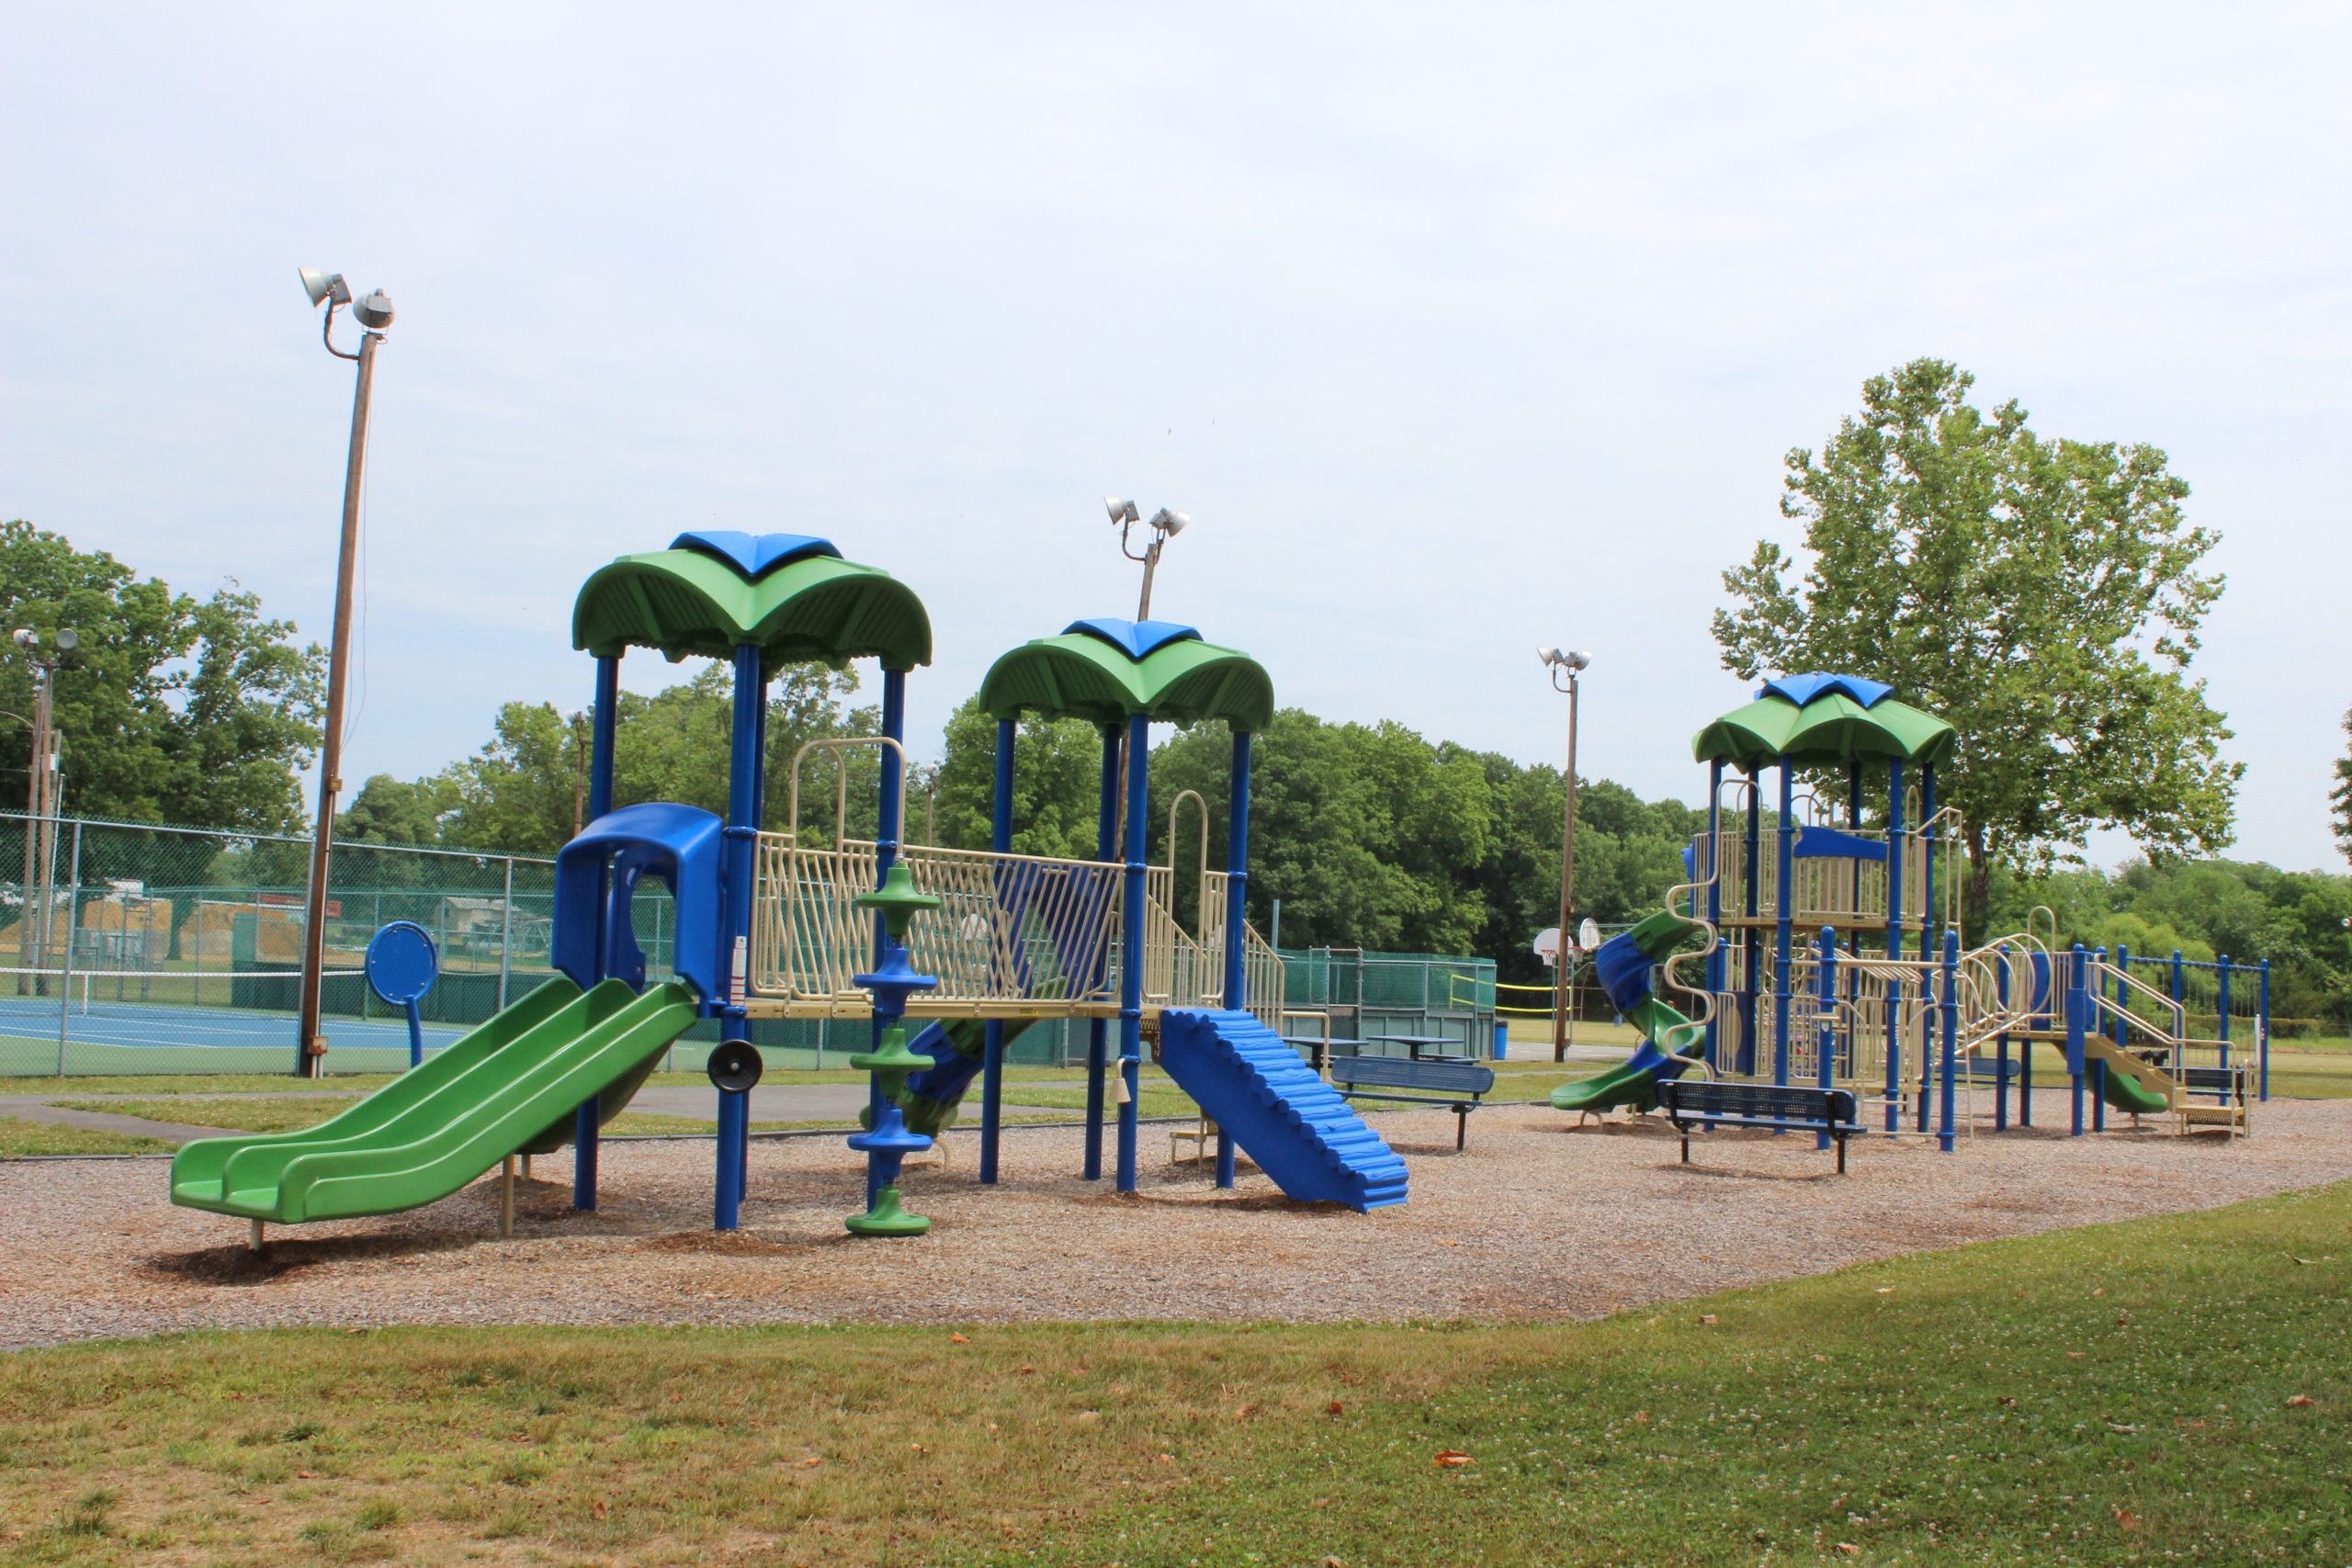 WIDE - Back View 1 at Frank LoBiondo Sr. Park Playground in Deerfield Township NJ